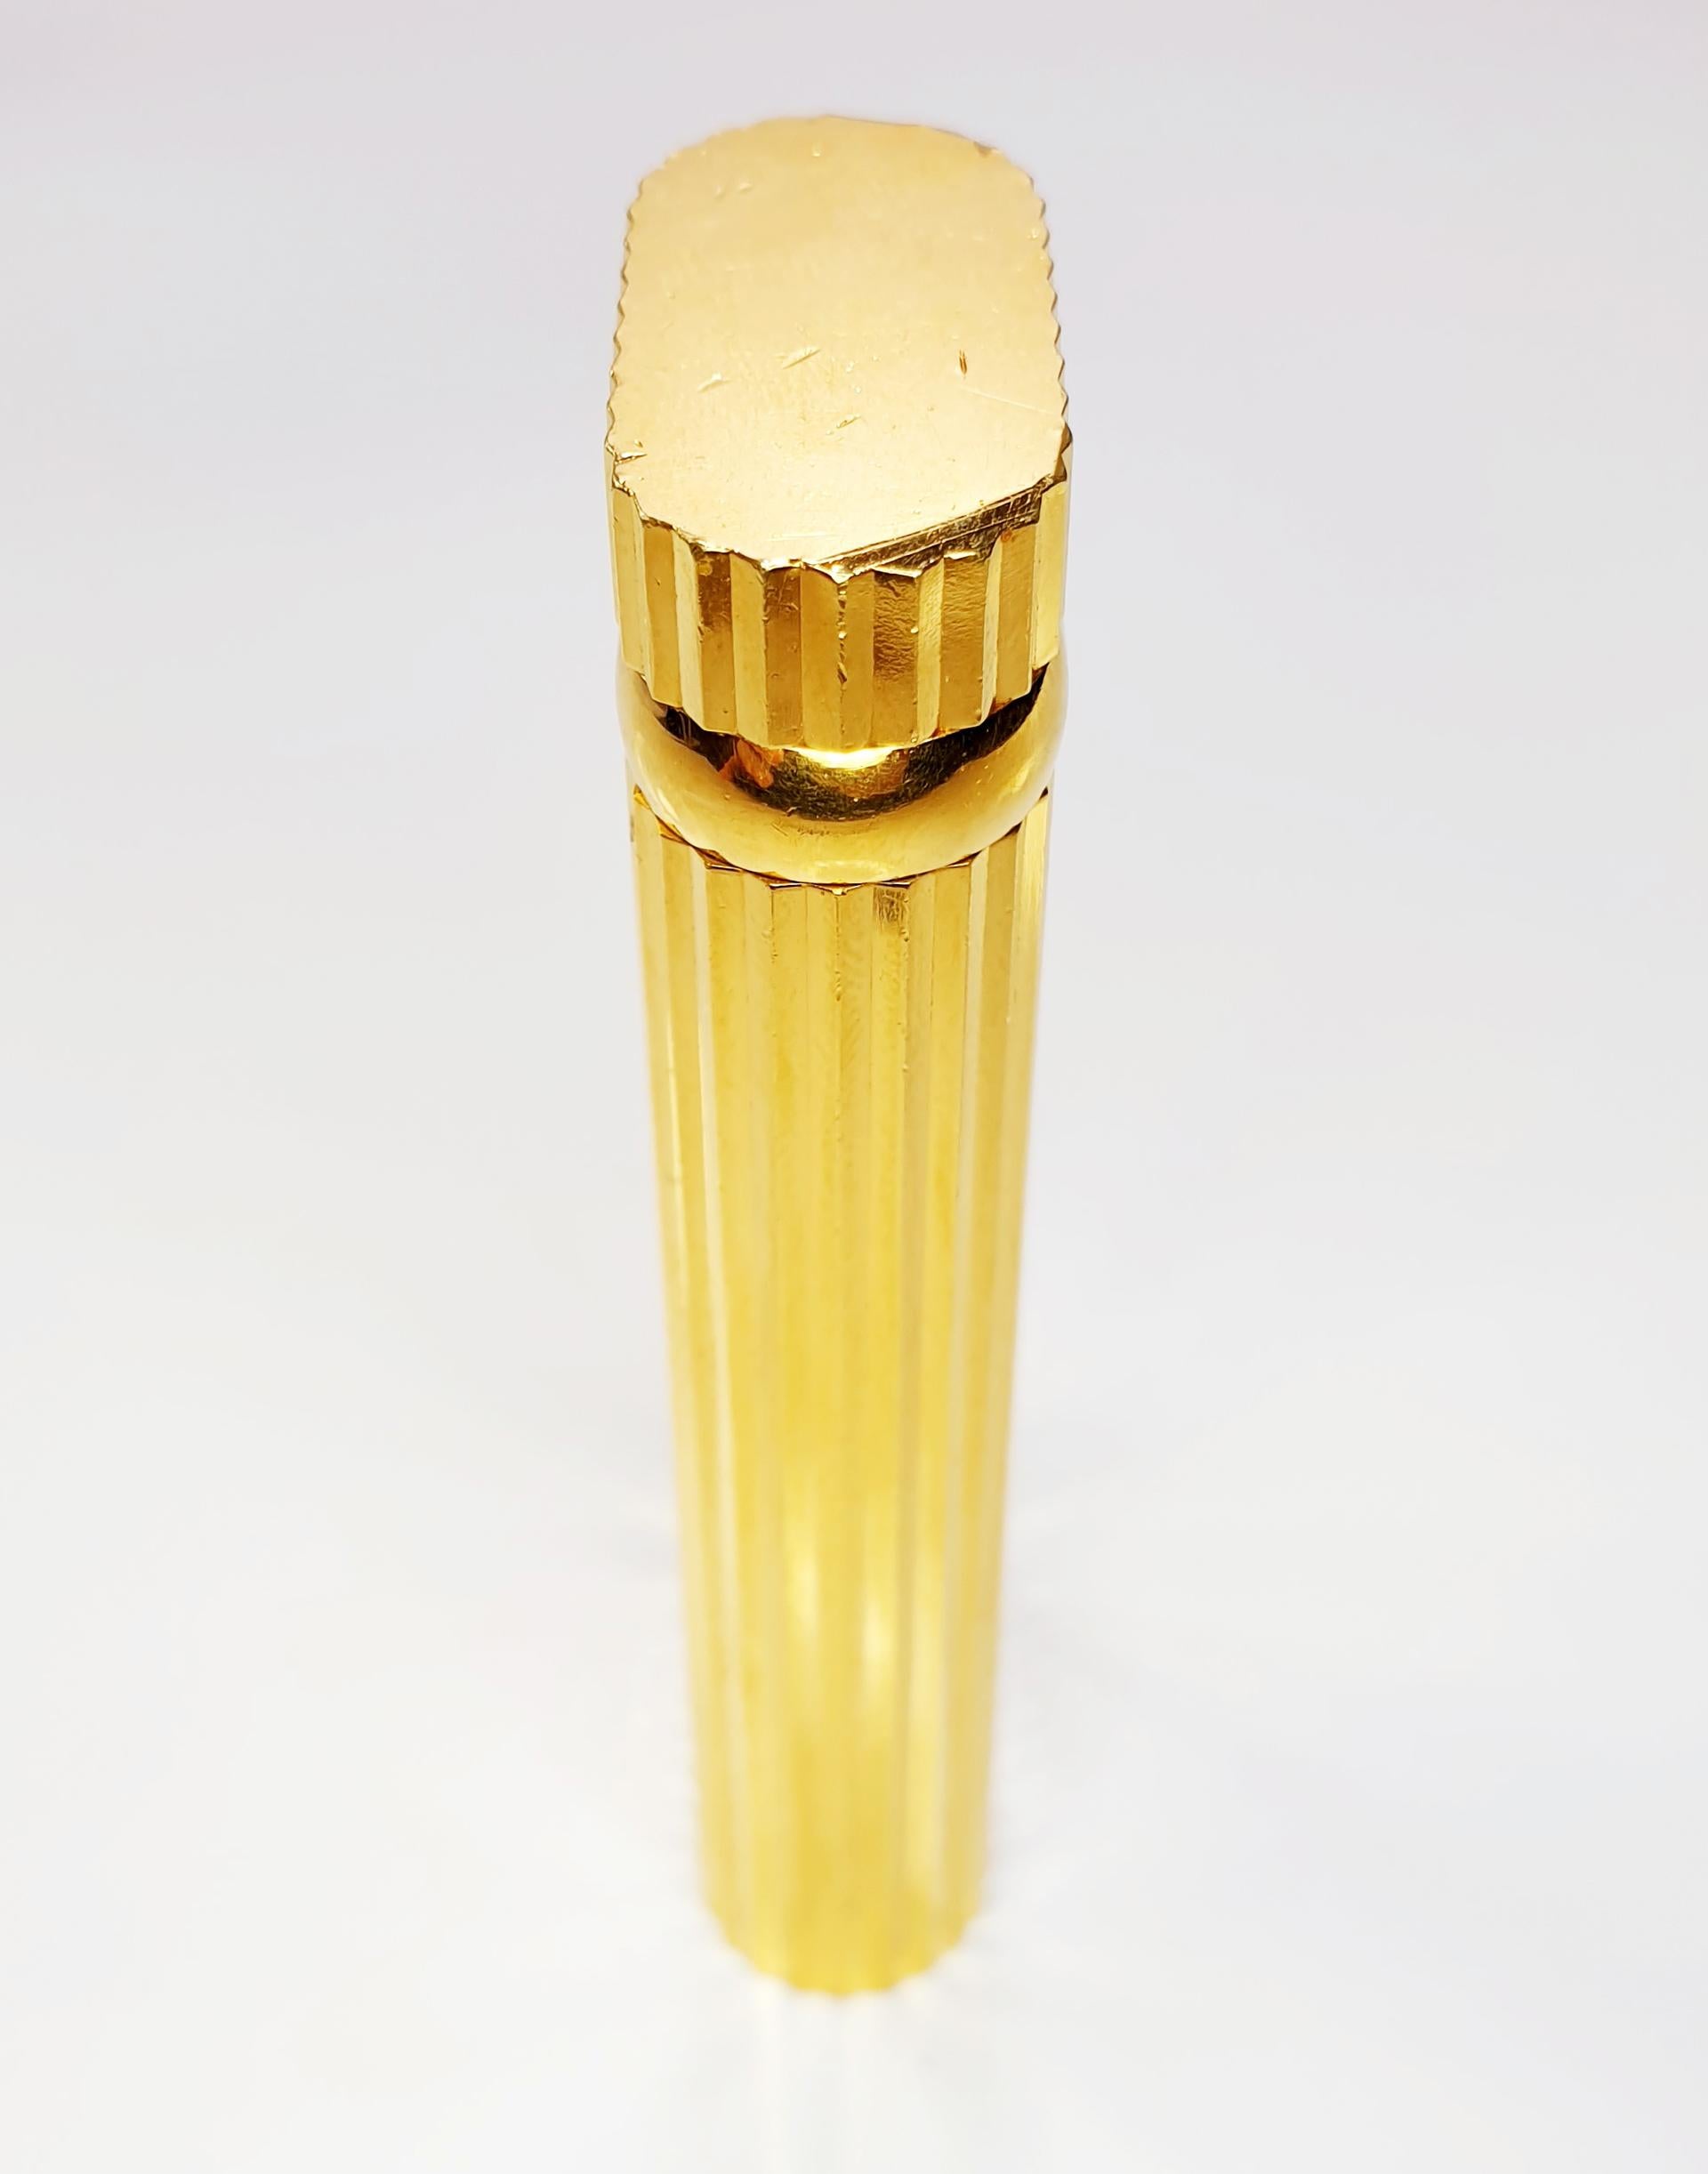 Sophisticated 'Pocket' lighter by Cartier in 18-karat gold-plated with an oval shaped body and a ribbed/fluted design. It has a flip-top lid that houses the Swiss-made mechanism. The flint wheel pivots when opened and closed as its designed to be